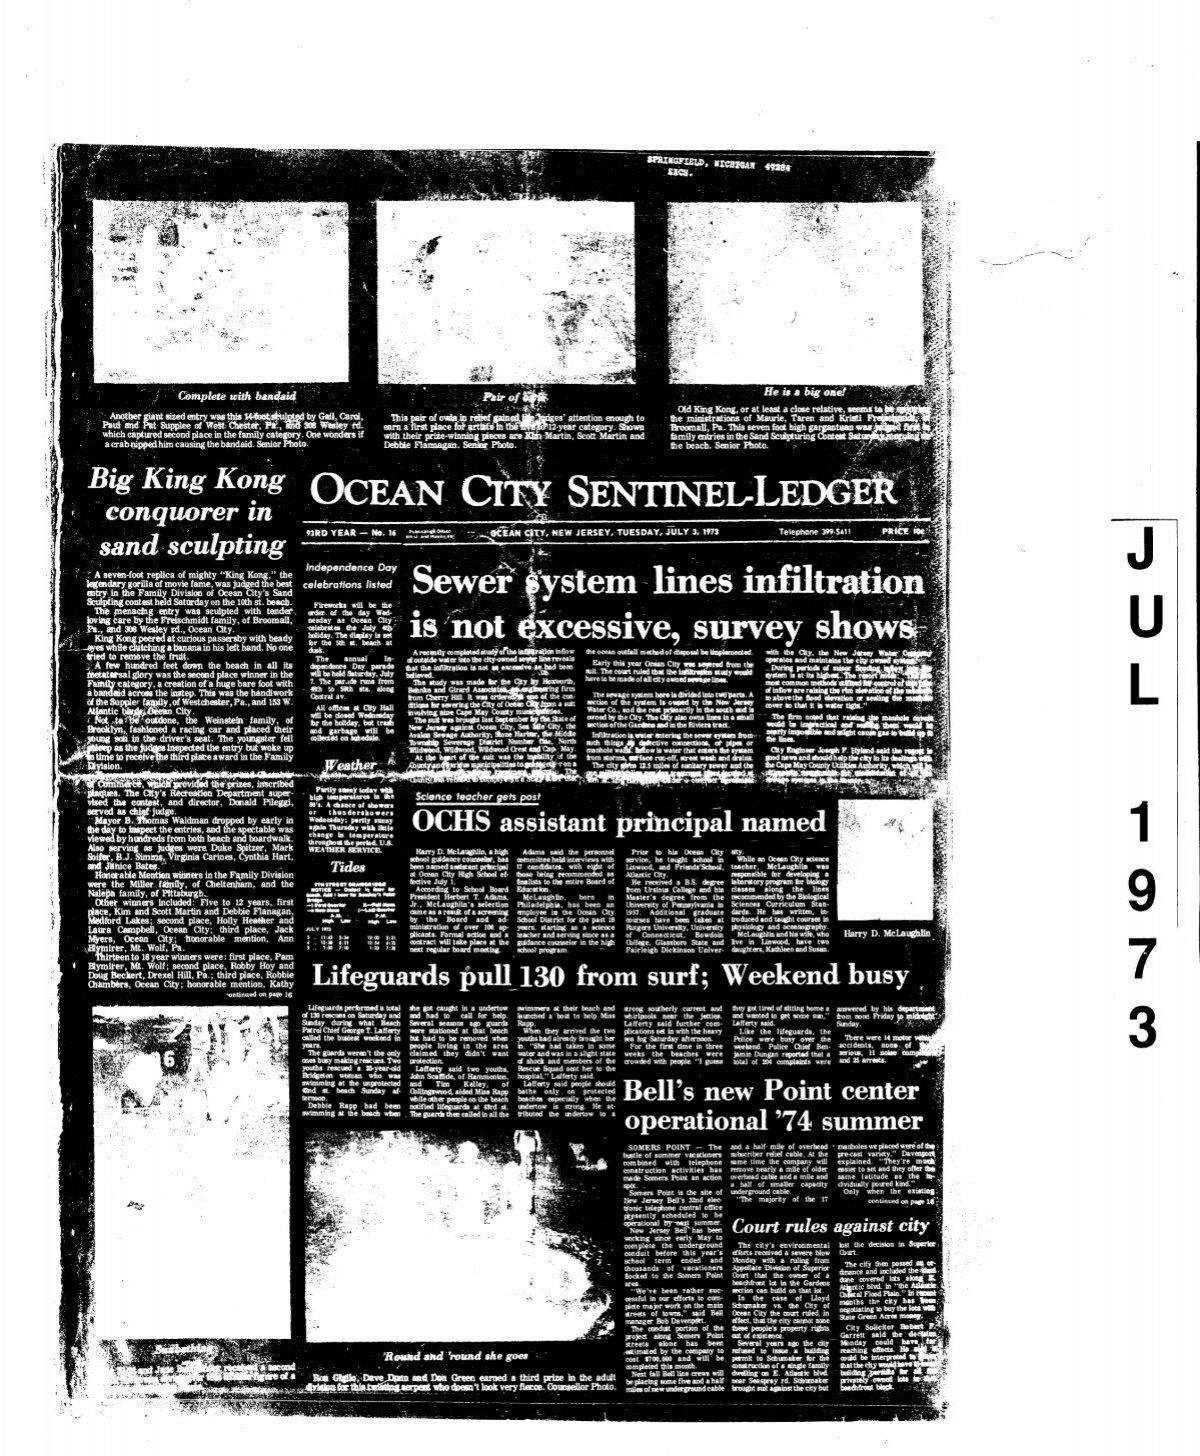 Pinni And Son In Law Really Rape Sex Video - Jul 1973 - On-Line Newspaper Archives of Ocean City